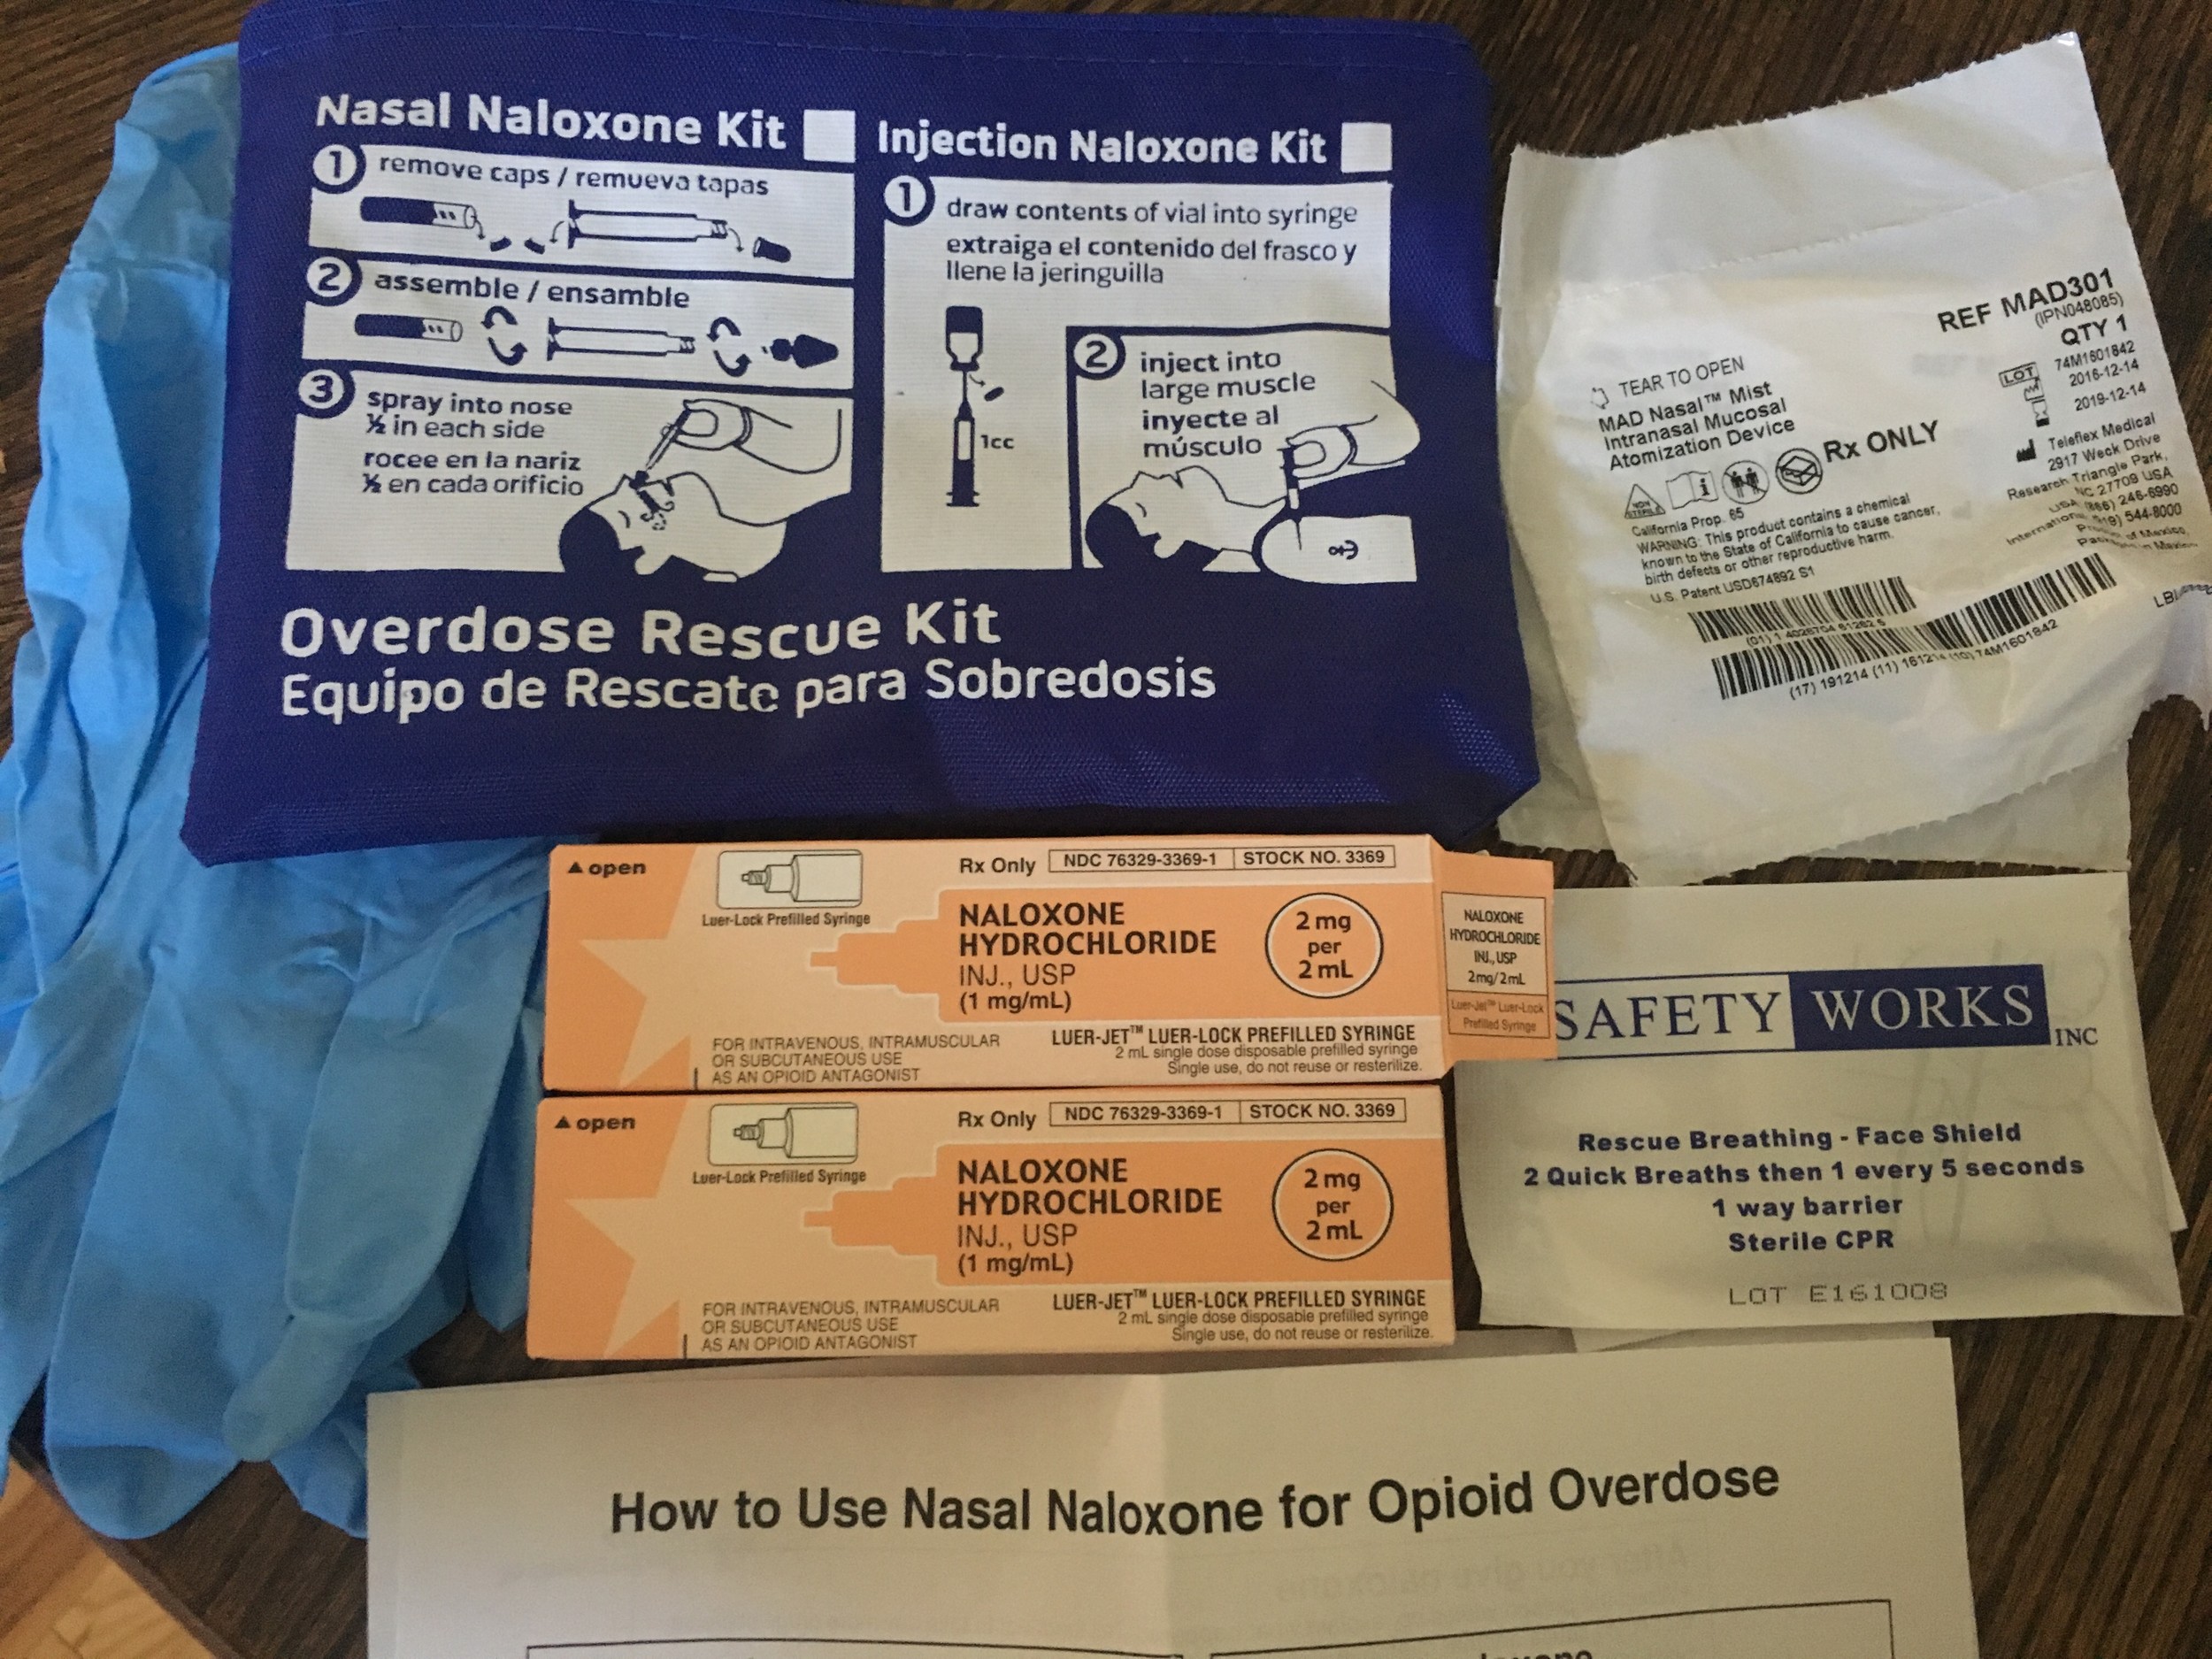 Narcan kits were distributed to trainees at New Horizon Counseling Center on June 8.